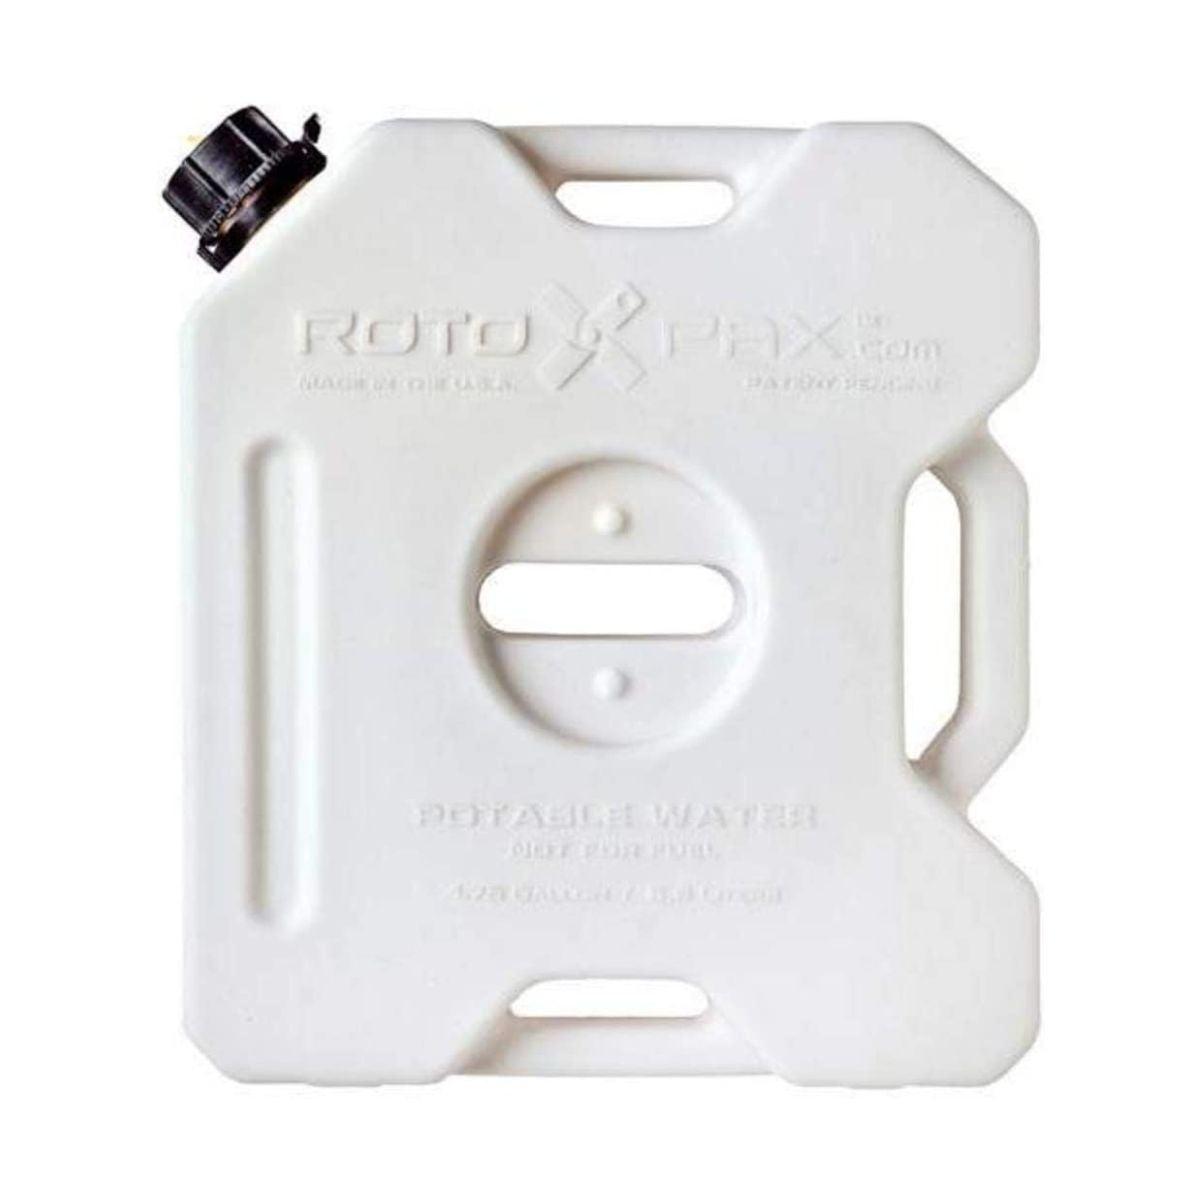 RotoPax RW-1W WaterPax Portable 1 Gallon Water Container